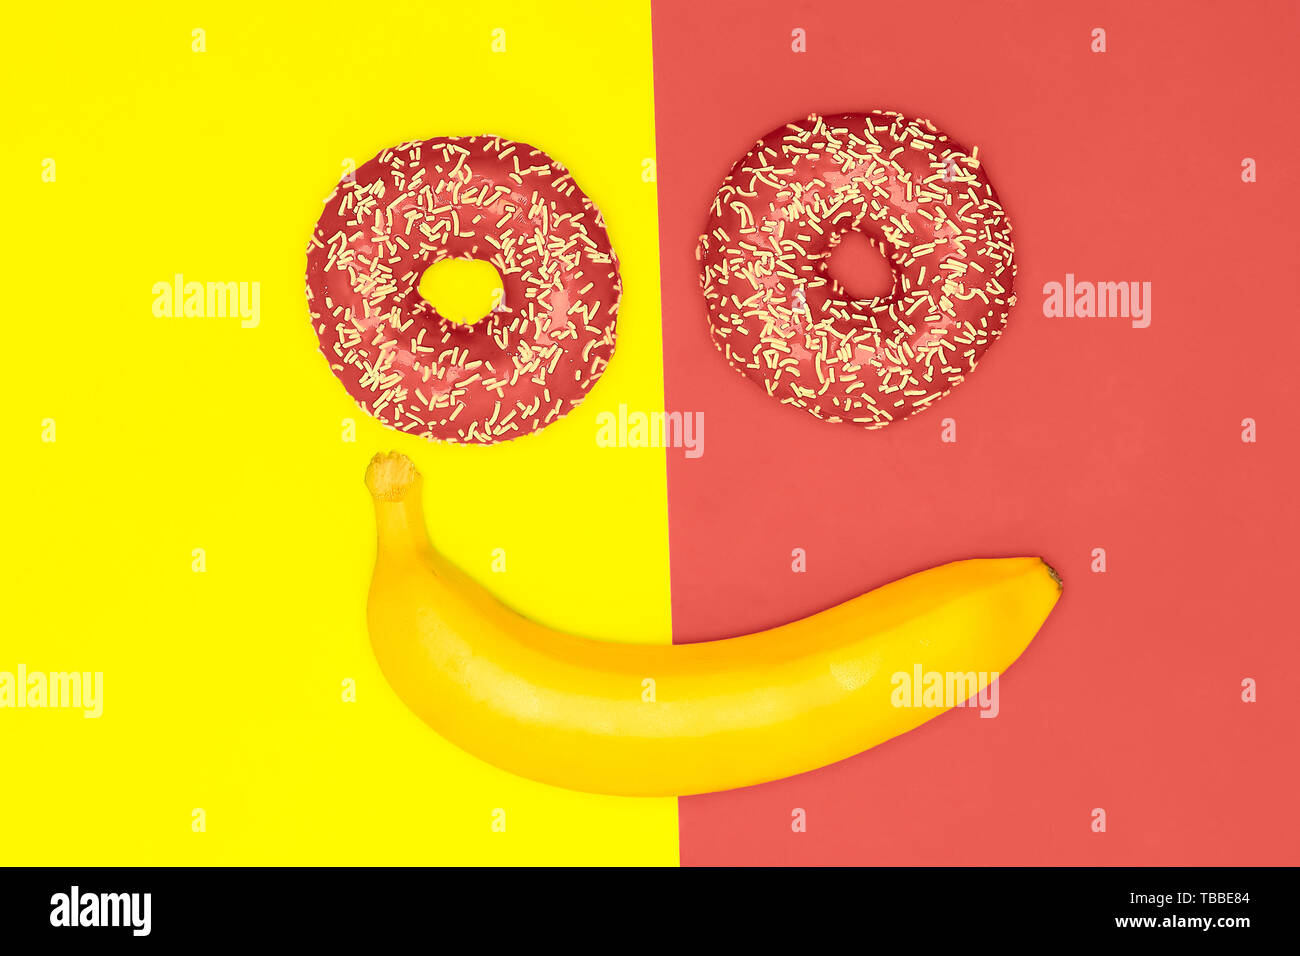 Good mood, smiles food concept. Donuts and a banana in the form of a smiling face. Living coral flat lay Stock Photo